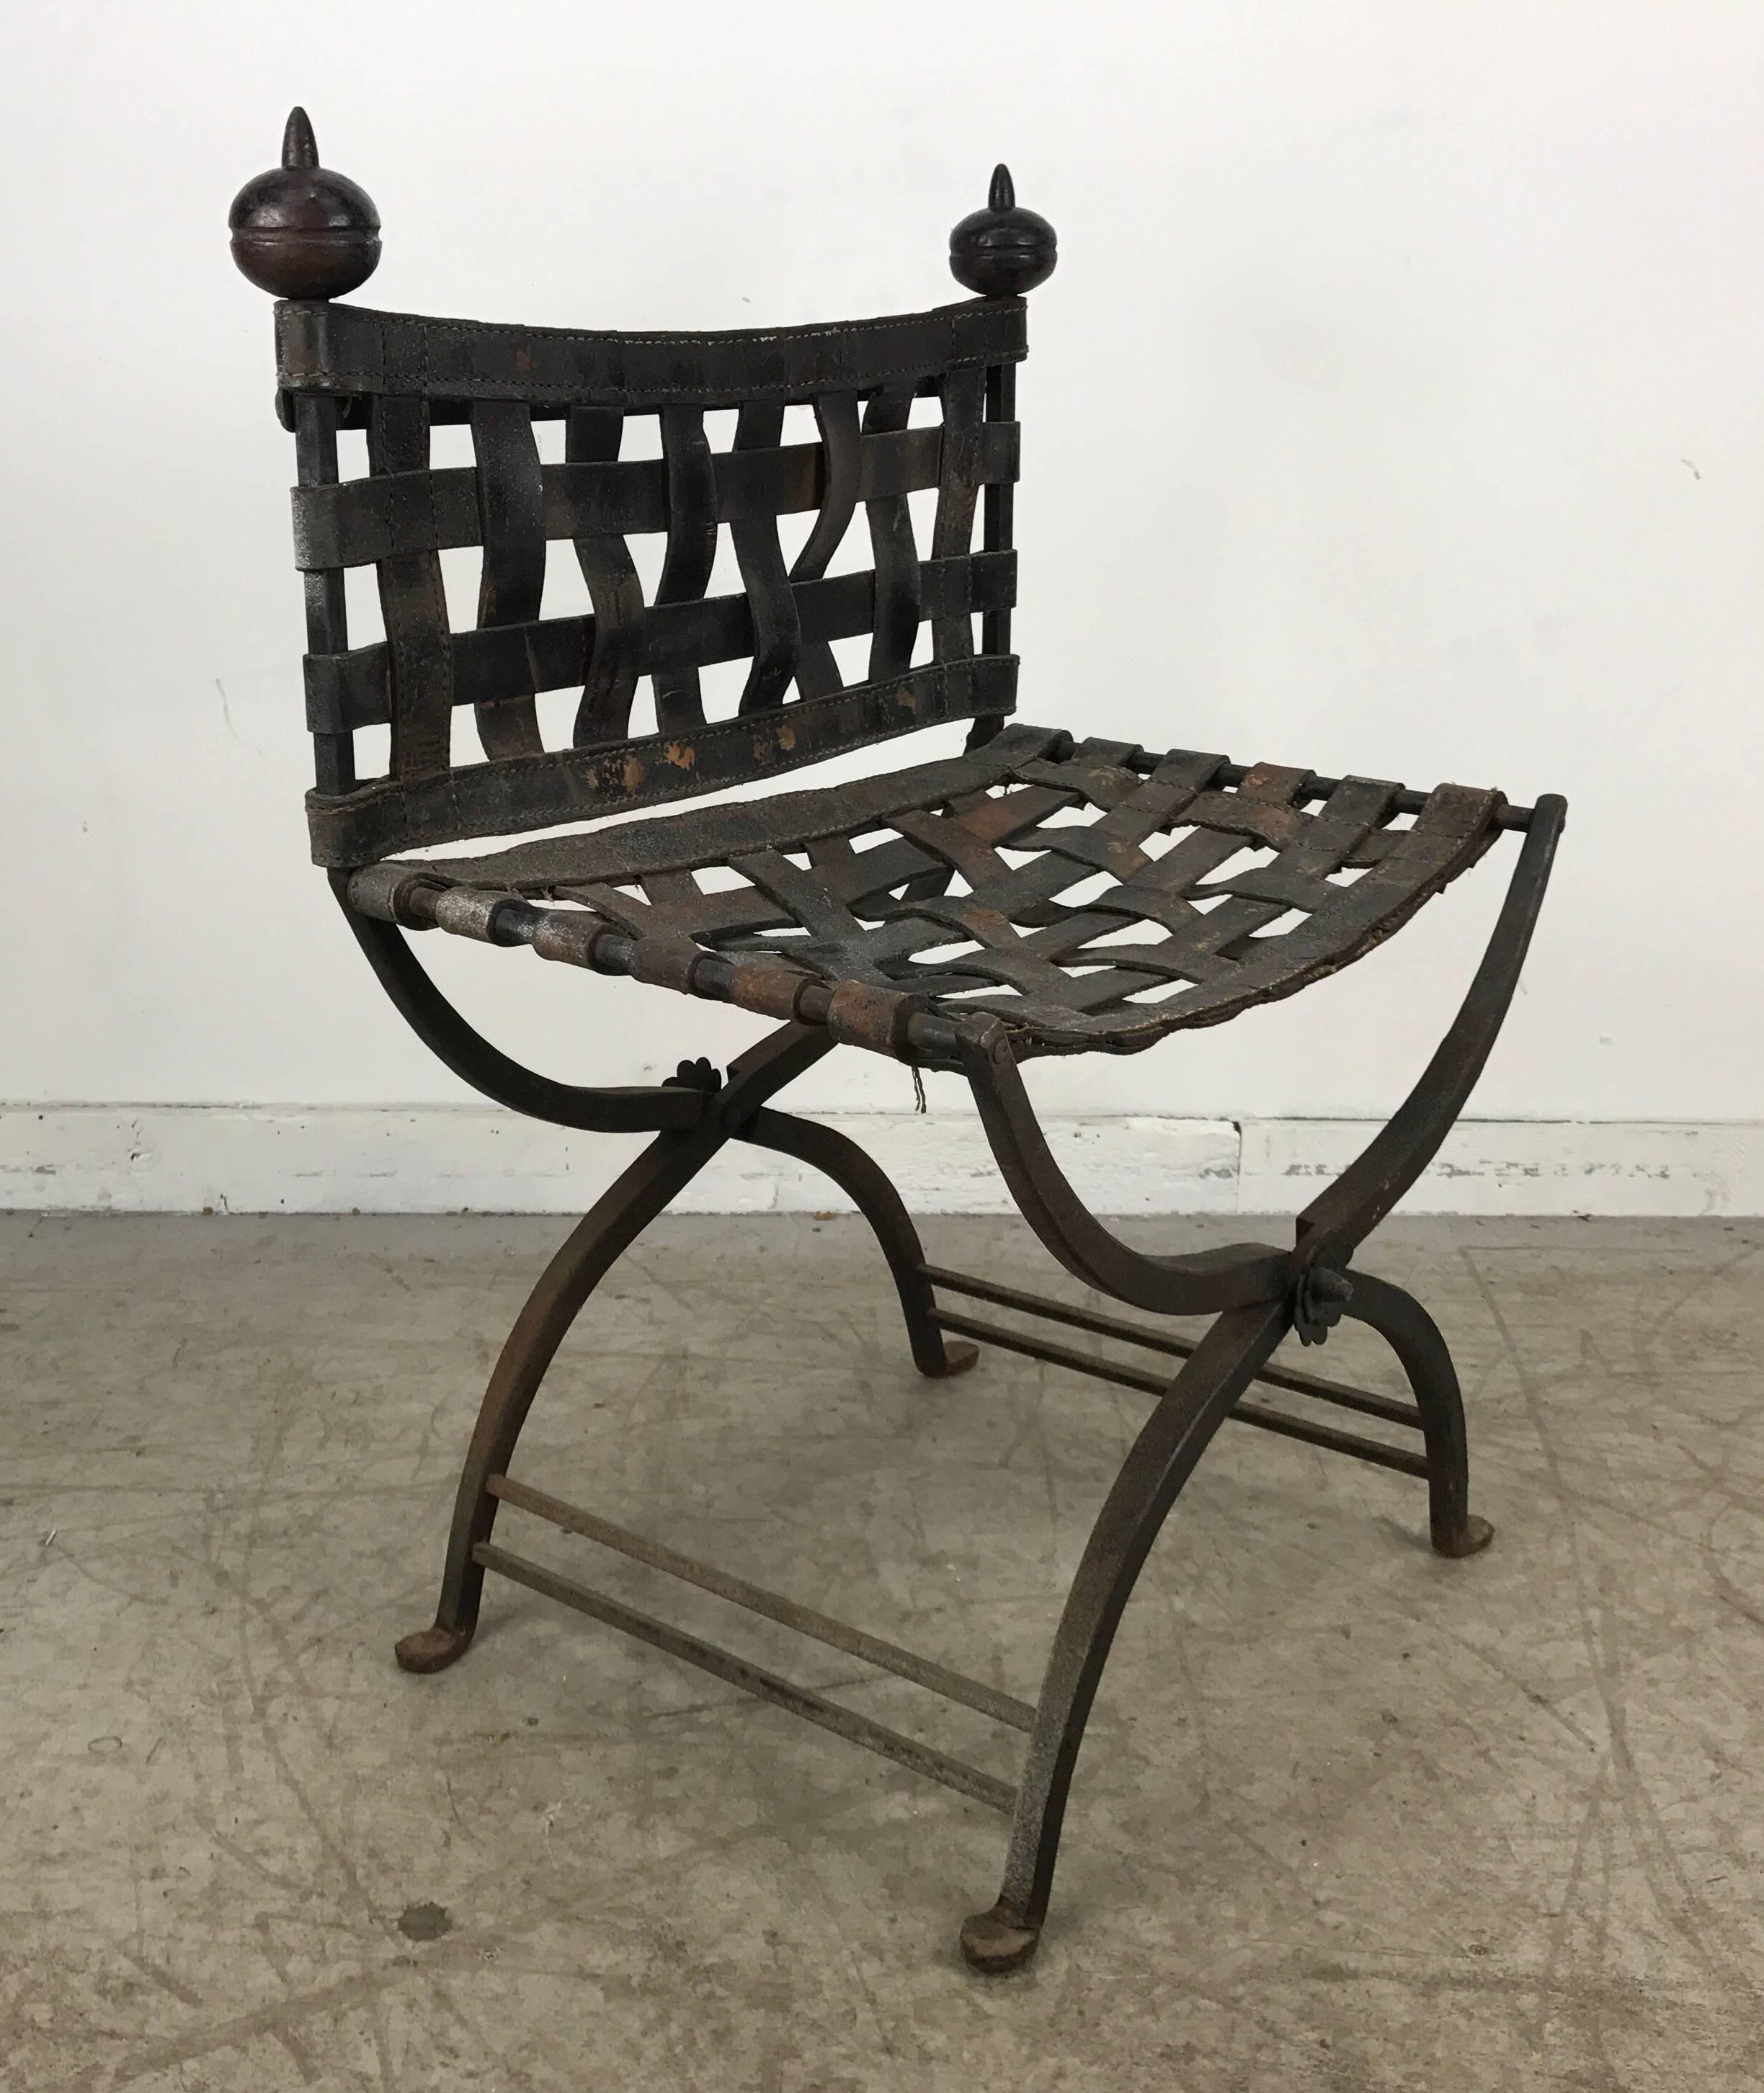 1920s Italian iron and leather Campaign chair. Retains original leather with age appropriate wear, see photo, iron frame and finials.